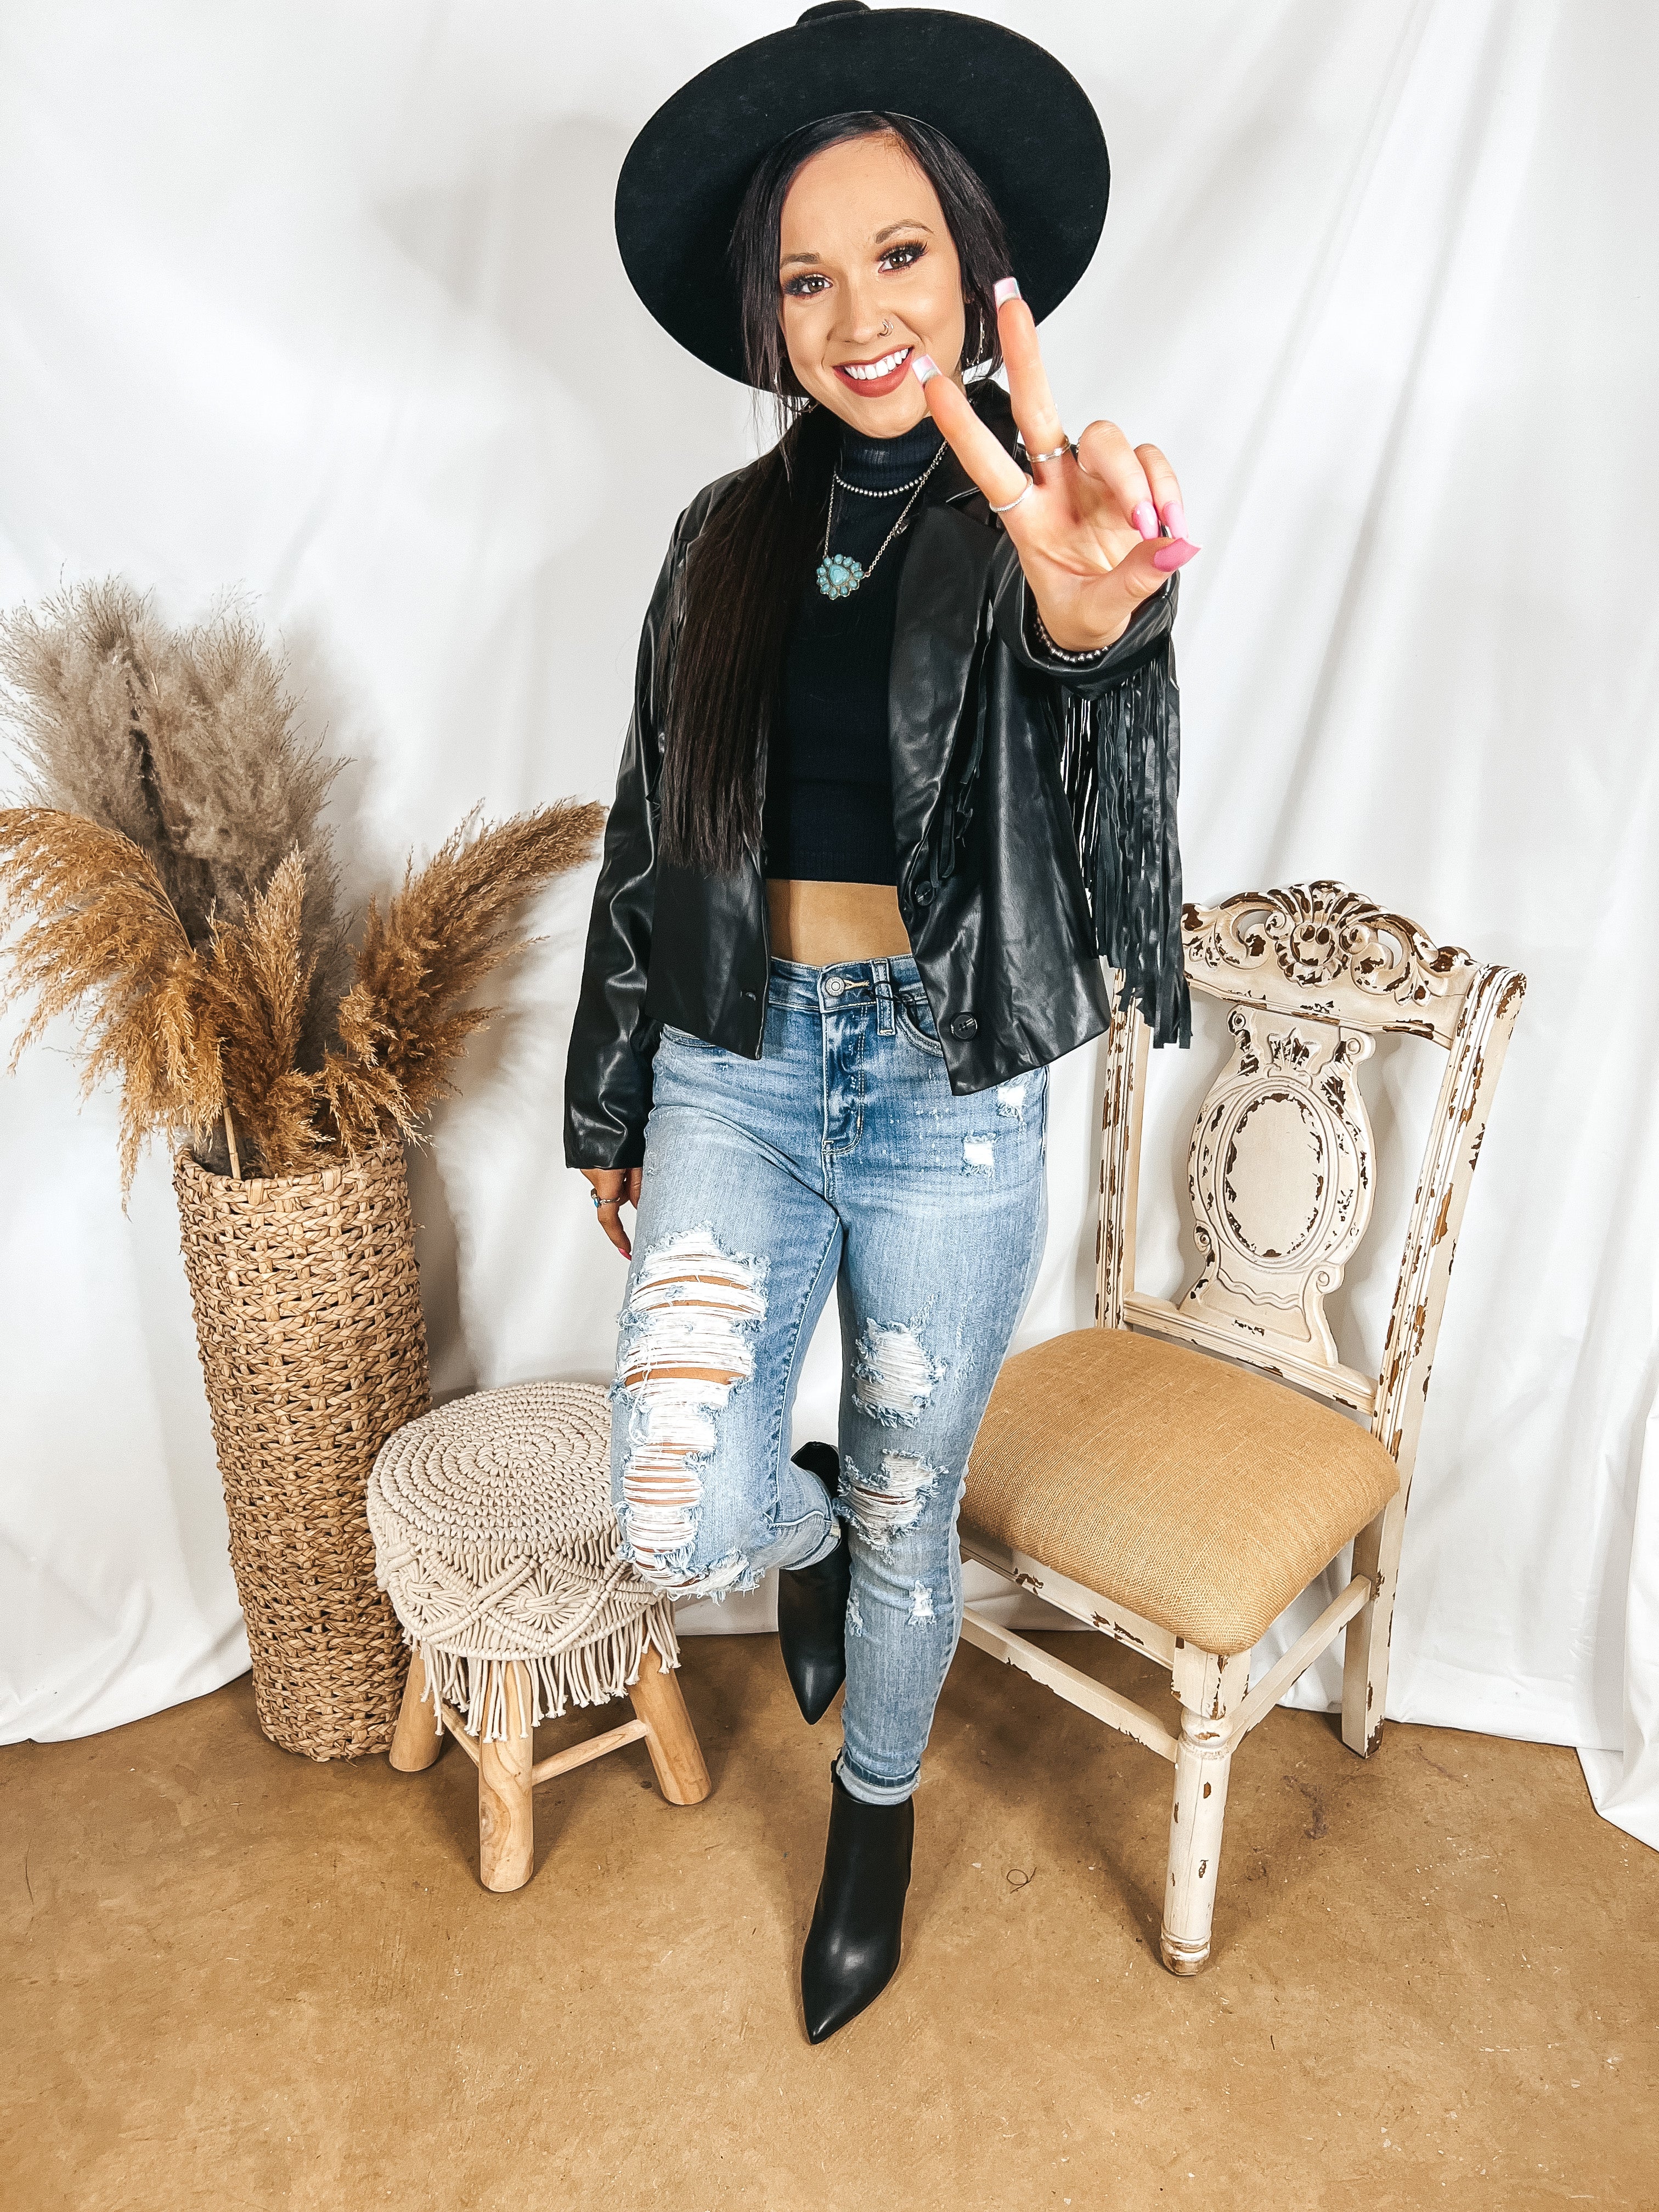 Off the Record Faux Leather Fringe Jacket in Black - Giddy Up Glamour Boutique